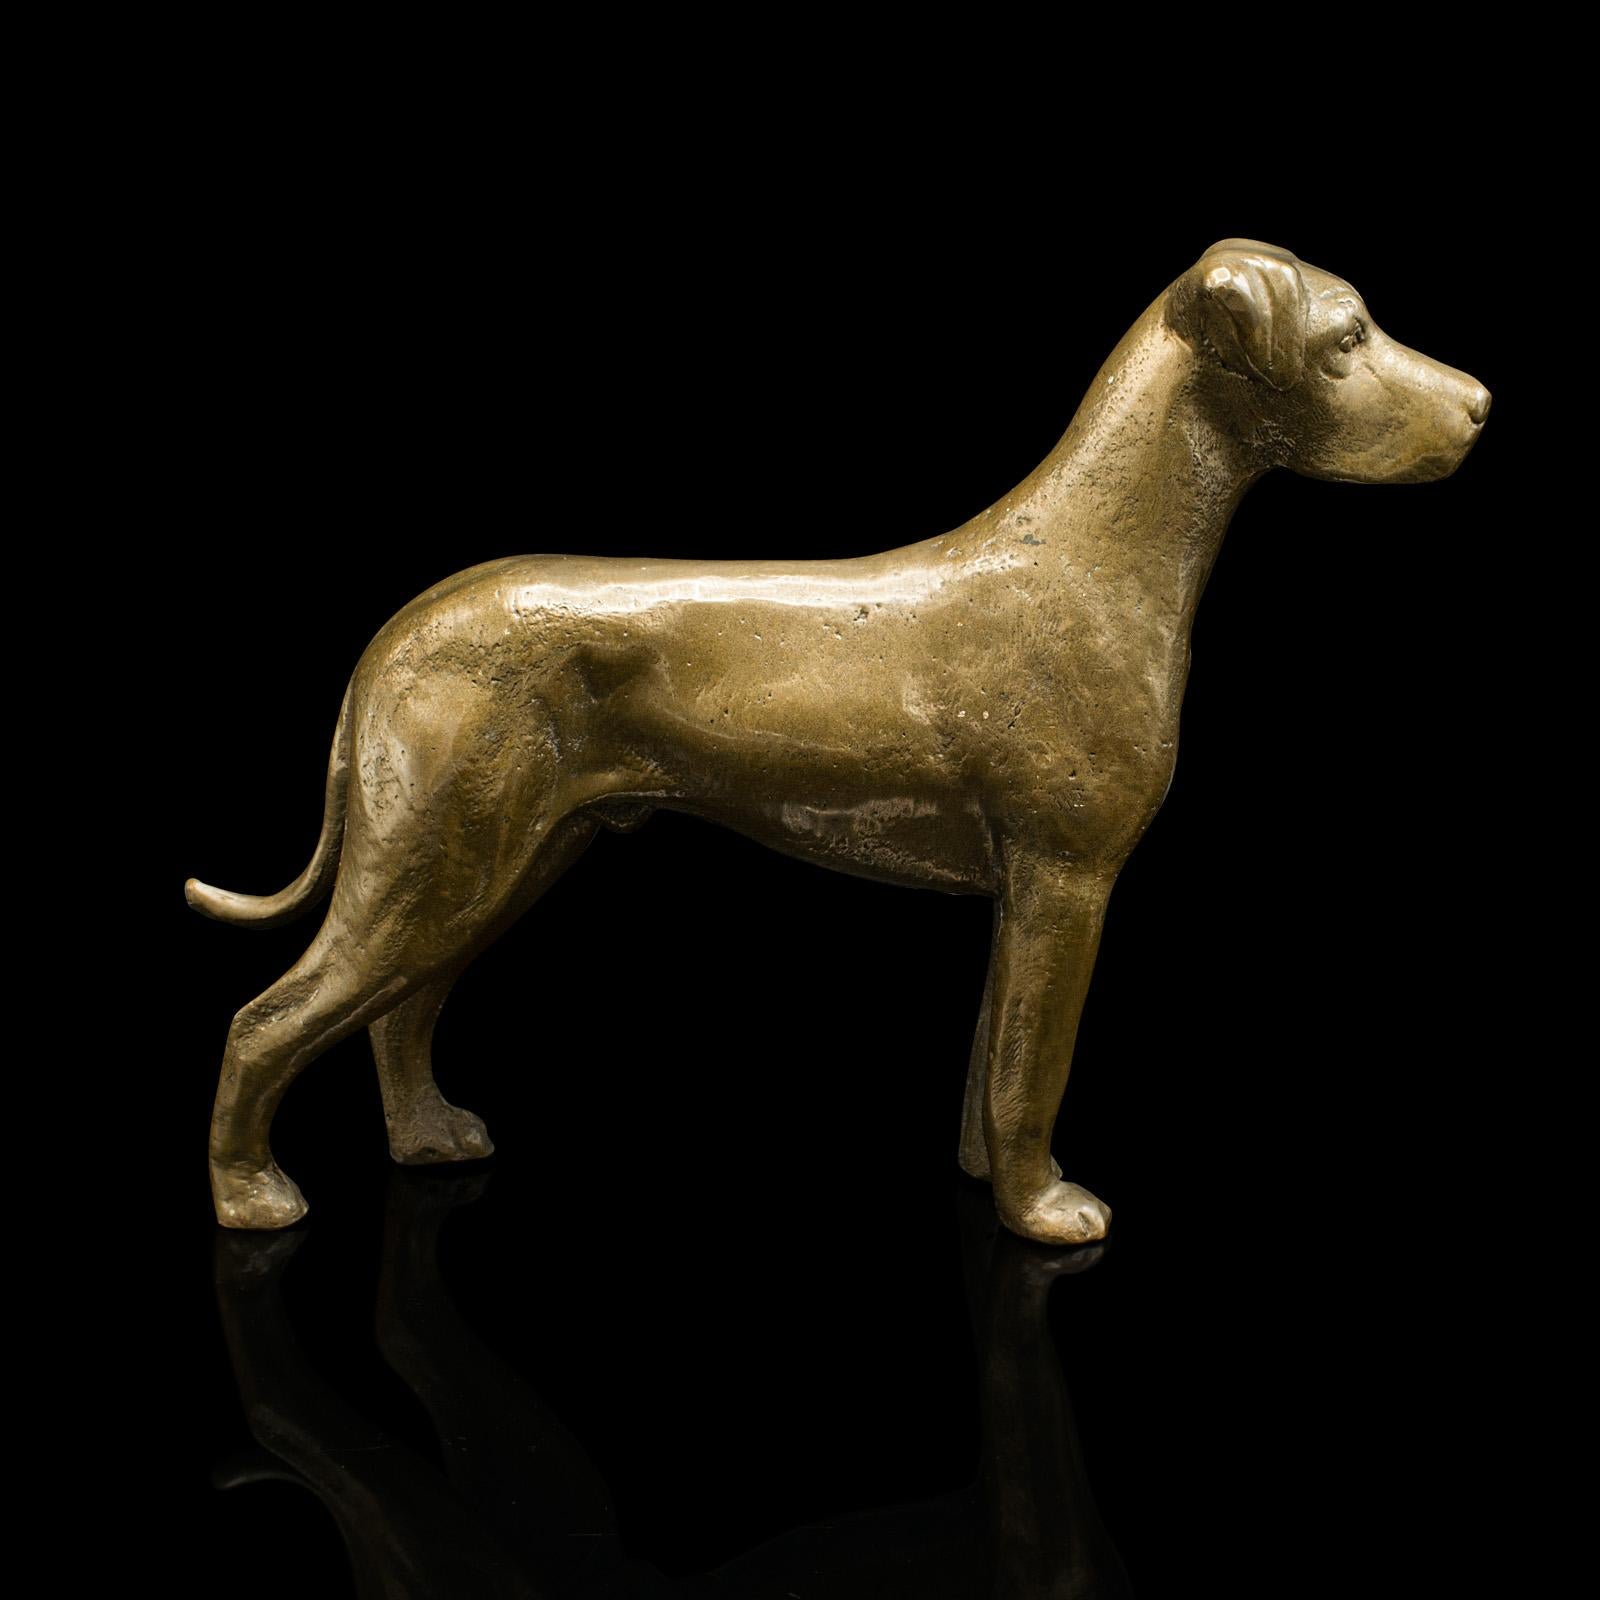 This is an antique Great Dane figure. An English, bronze decorative dog statue, dating to the late Victorian period, circa 1900.

Appealing weight to this desktop best friend
Displays a desirable aged patina and in good original order
Pleasingly